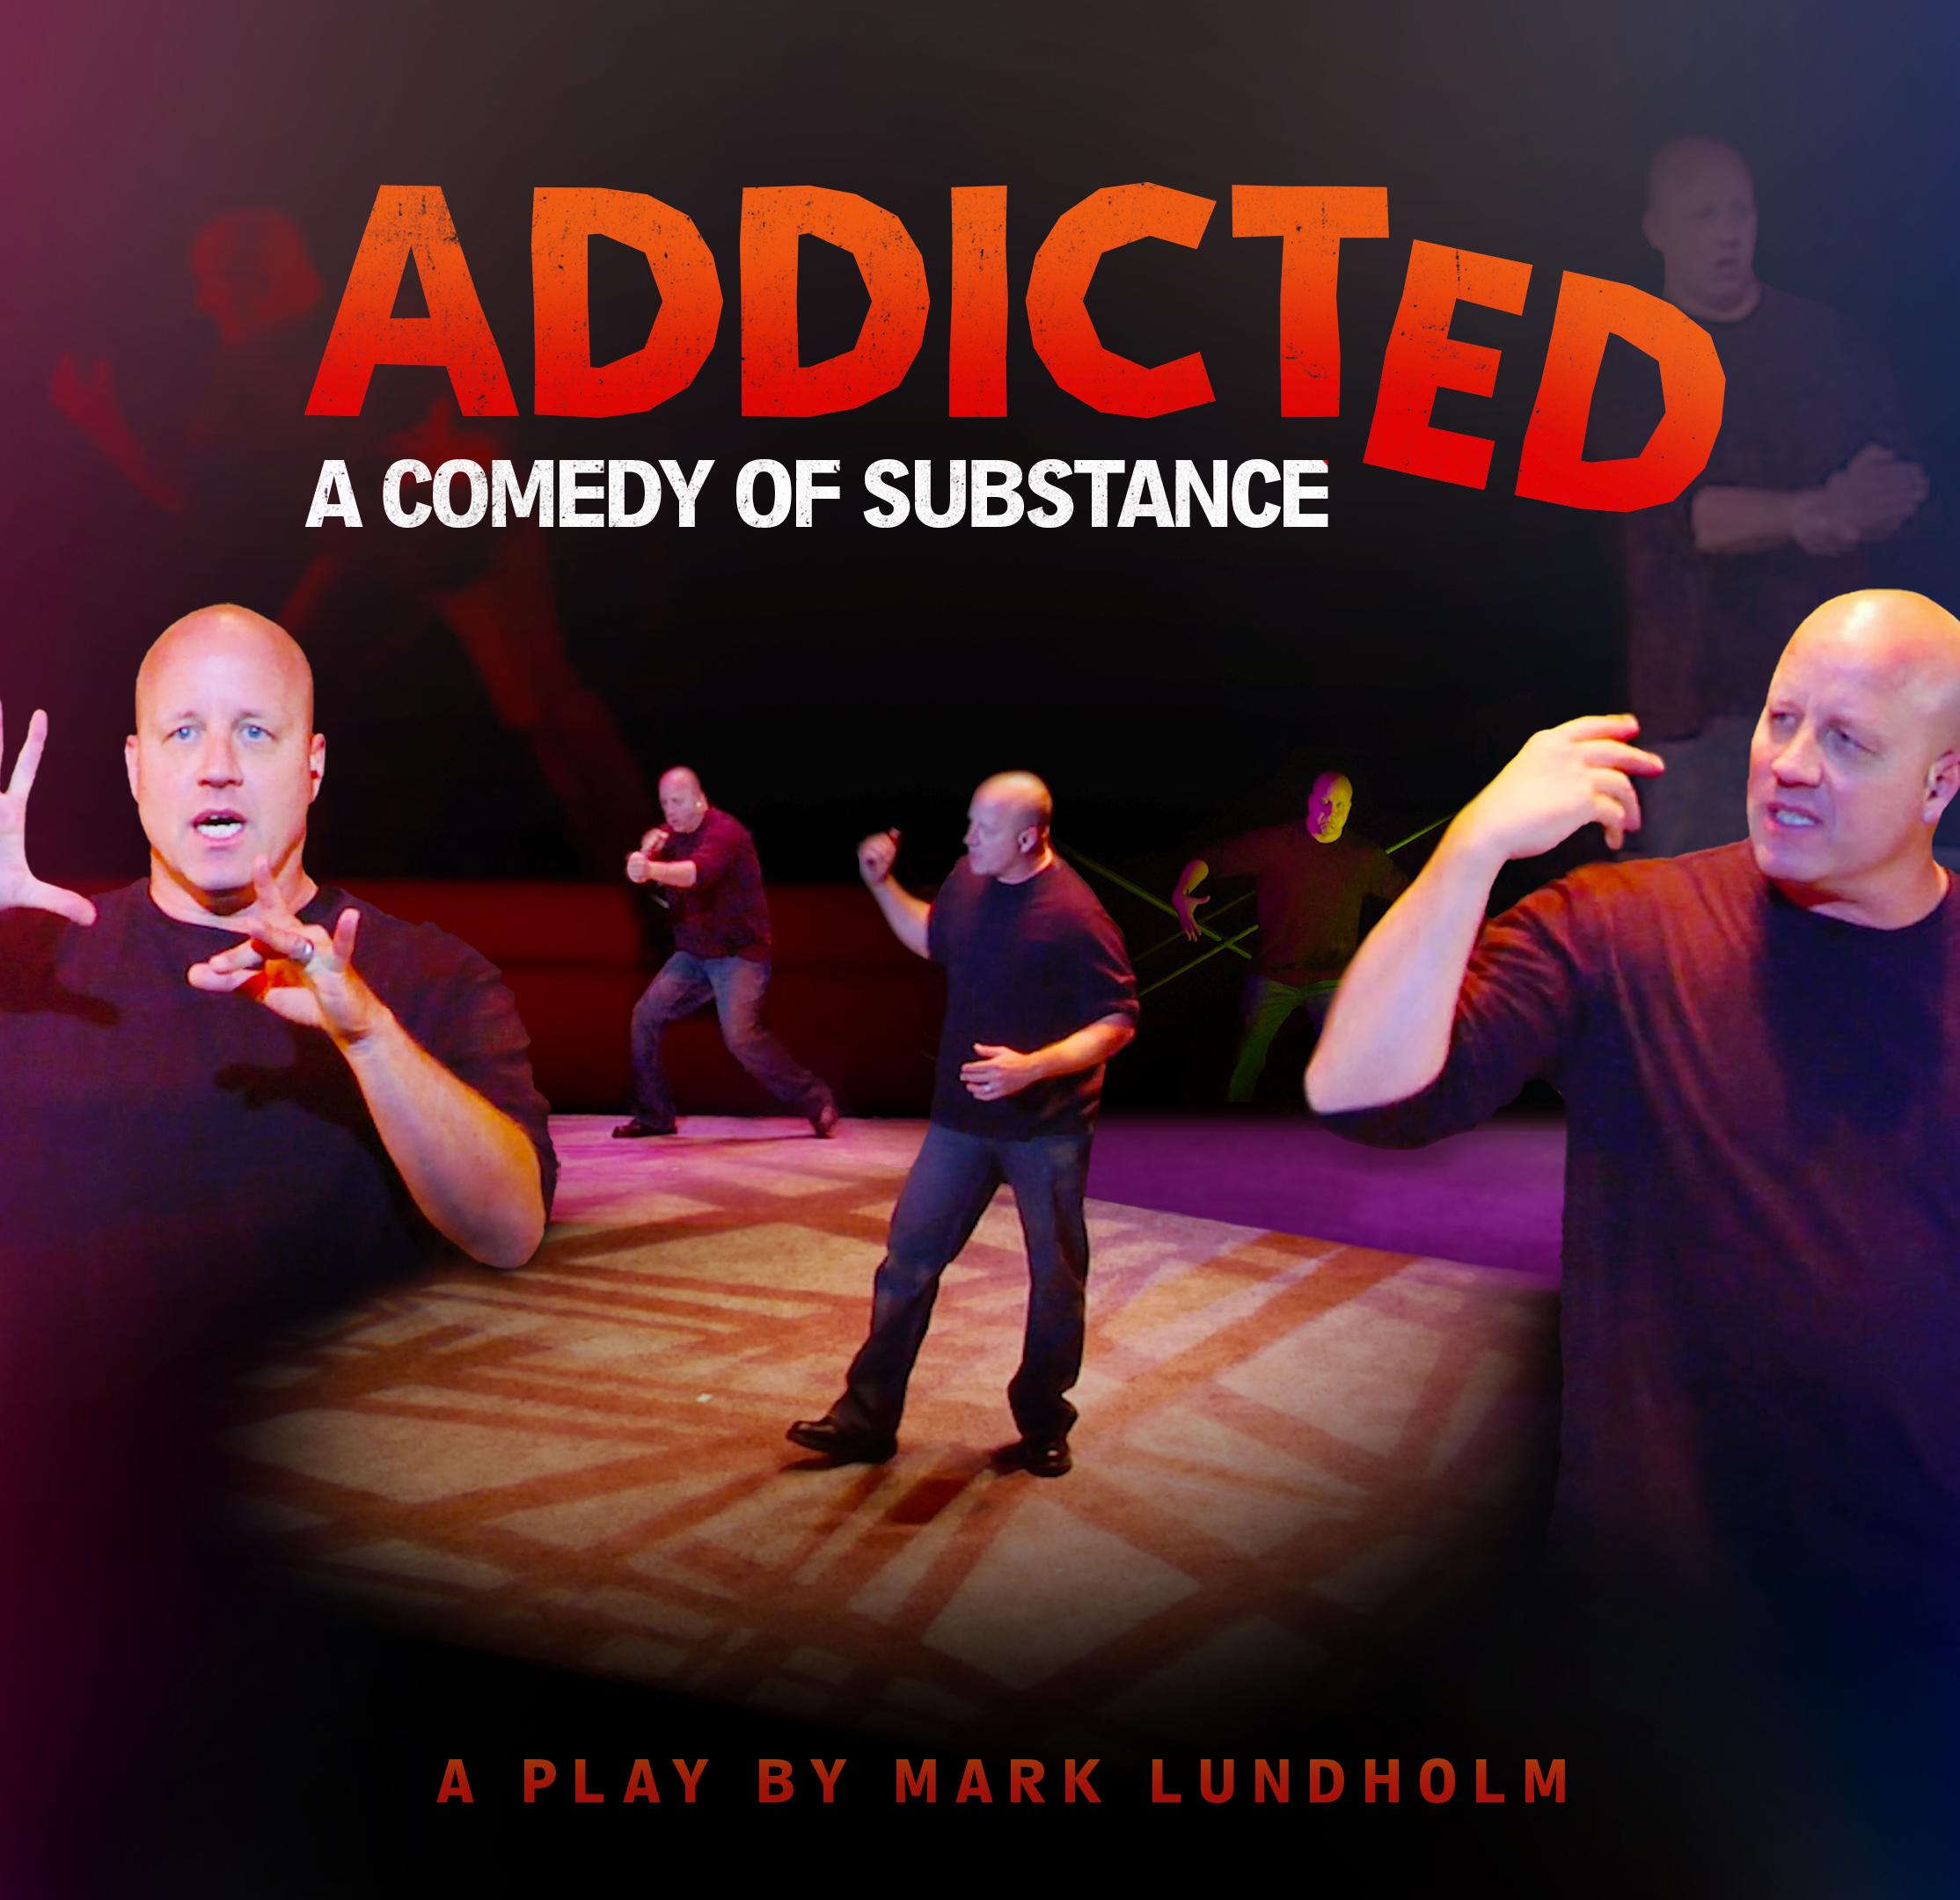 Addicted: A Comedy of Substance